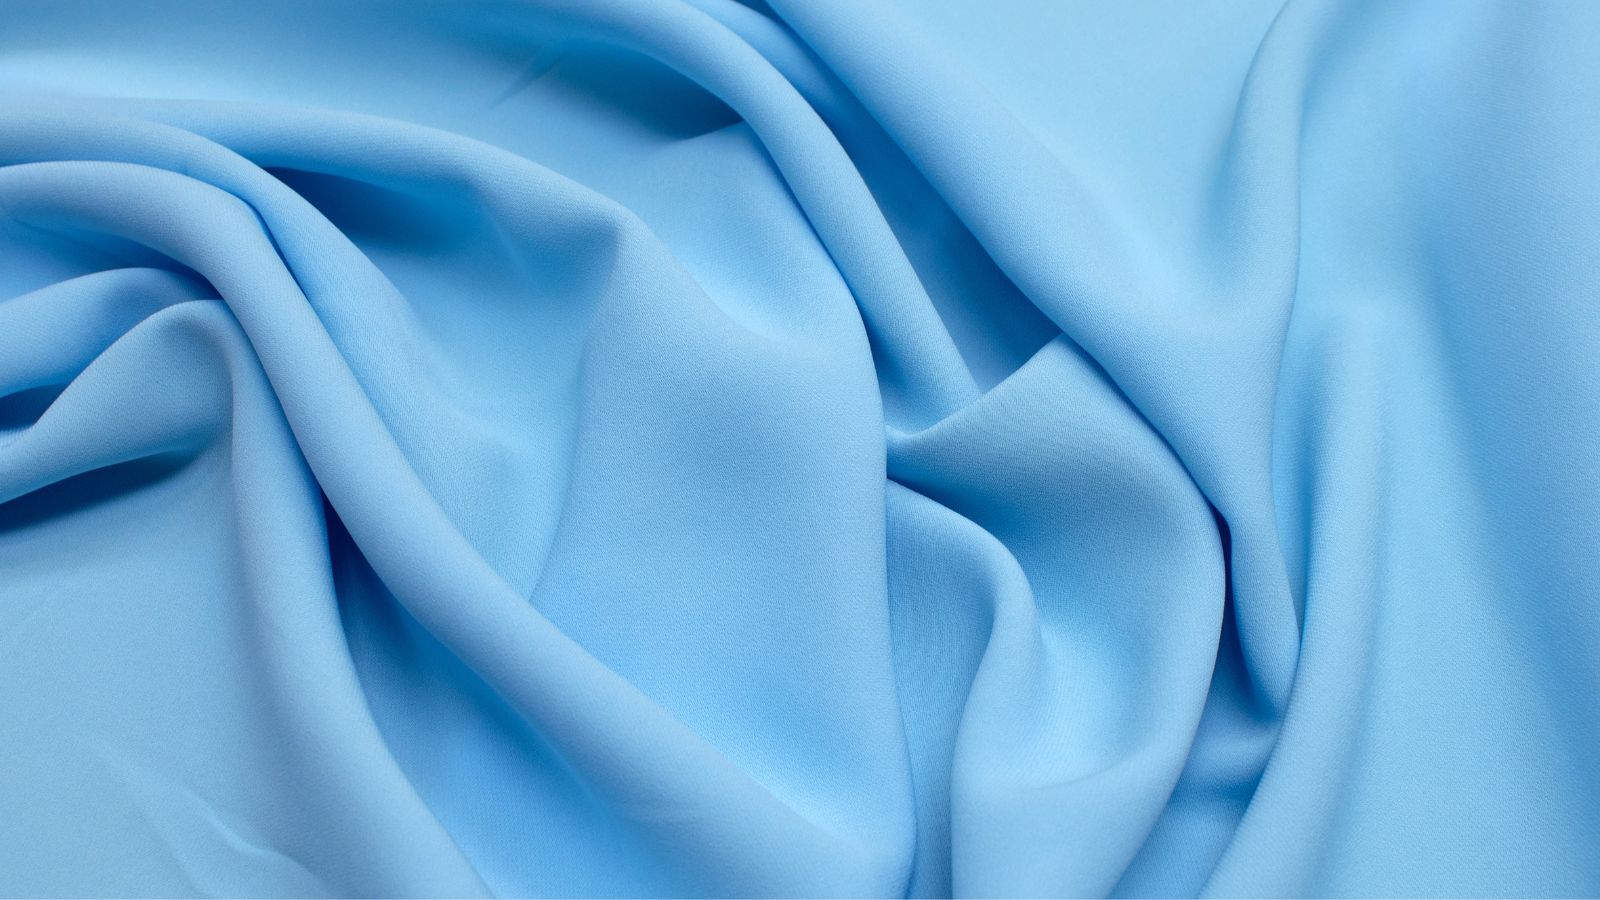 Does Rayon Fabric Shrink? (Yes, Why and How to Prevent)